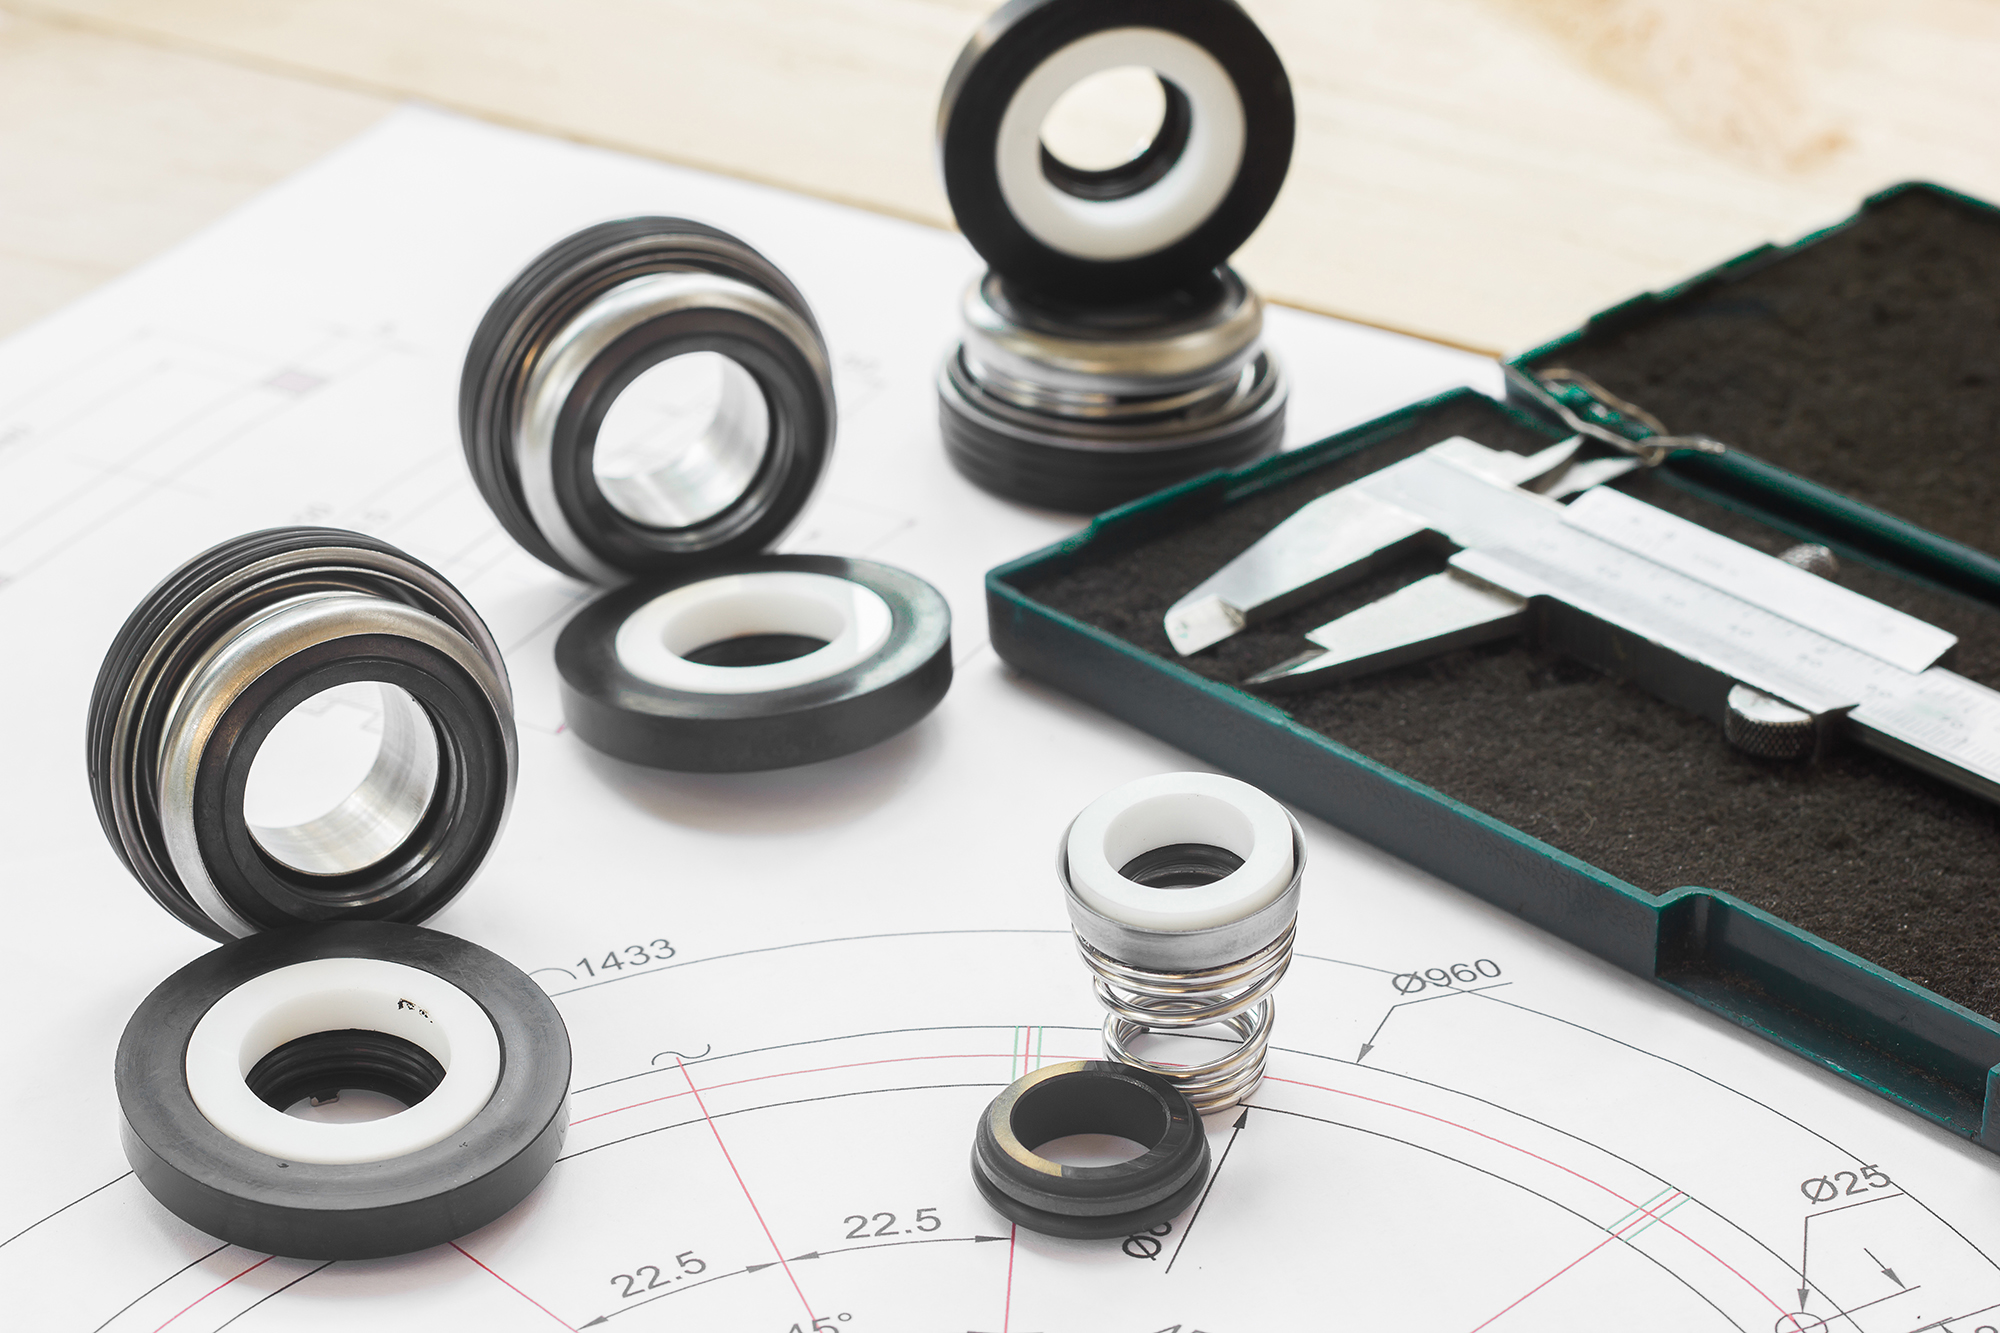 How to Choose an O-Ring for Harsh Environments